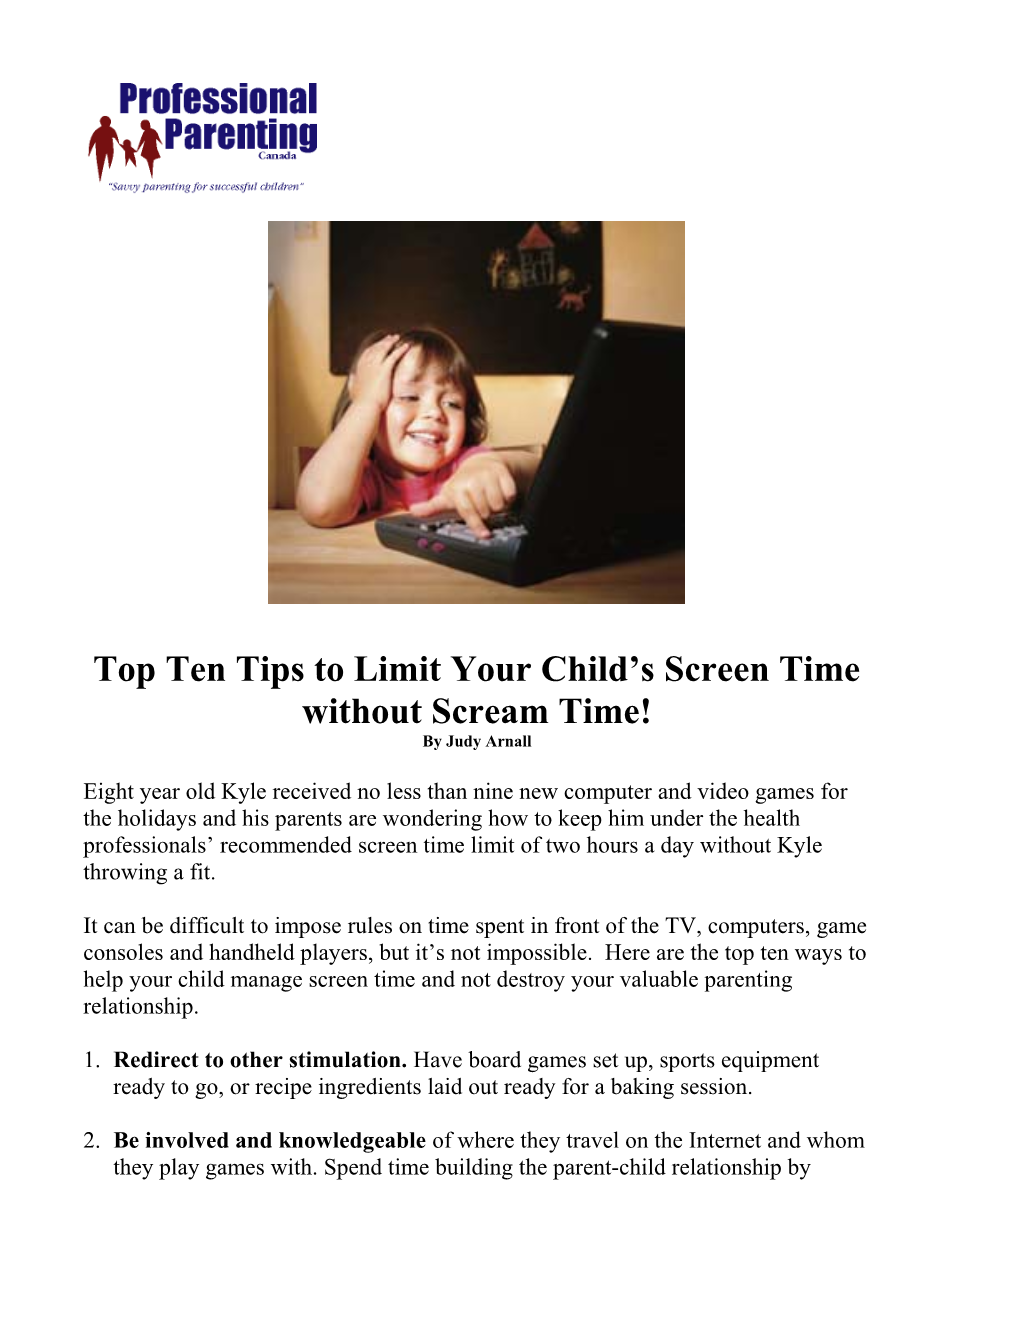 Top Ten Tips to Limit Your Child S Screen Time Without Scream Time!